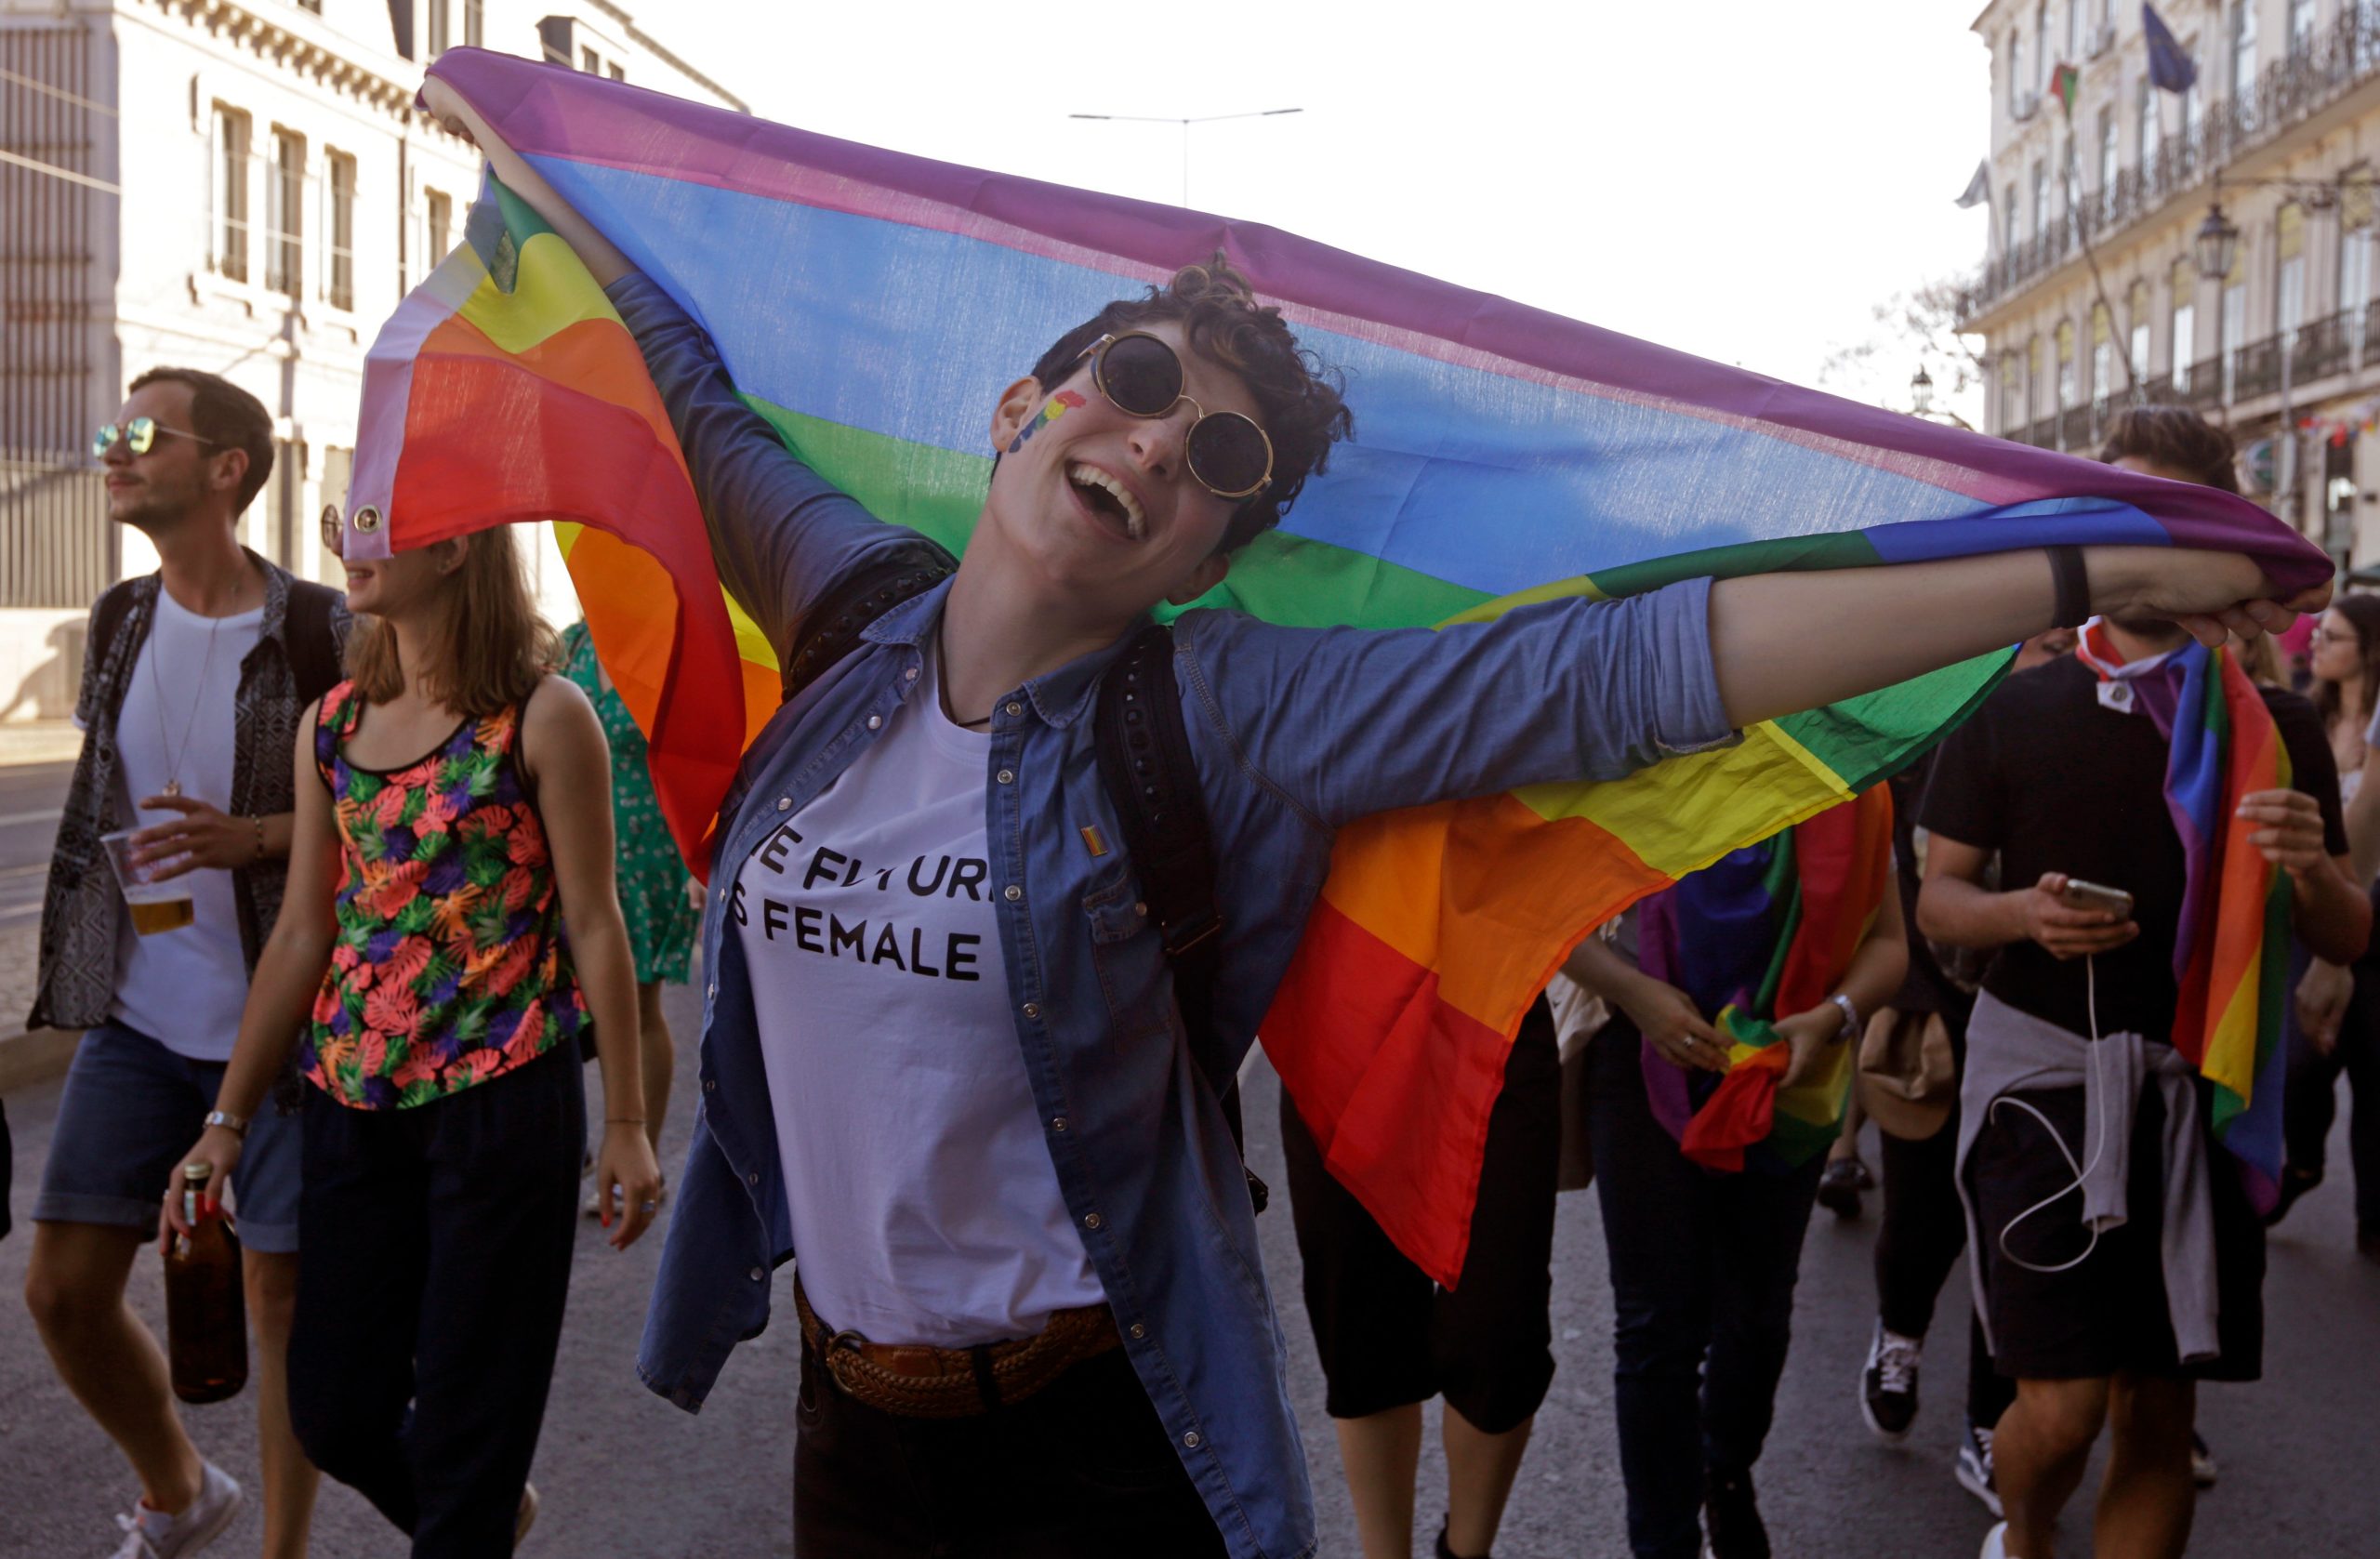 A woman holds a rainbow flag during the Lesbian, Gay, Bisexual, Transsexual, Transgender, Intersex Pride parade (LGBTI) in Lisbon on June 16, 2018. (Photo by JOSE MANUEL RIBEIRO / AFP) (Photo credit should read JOSE MANUEL RIBEIRO/AFP via Getty Images)